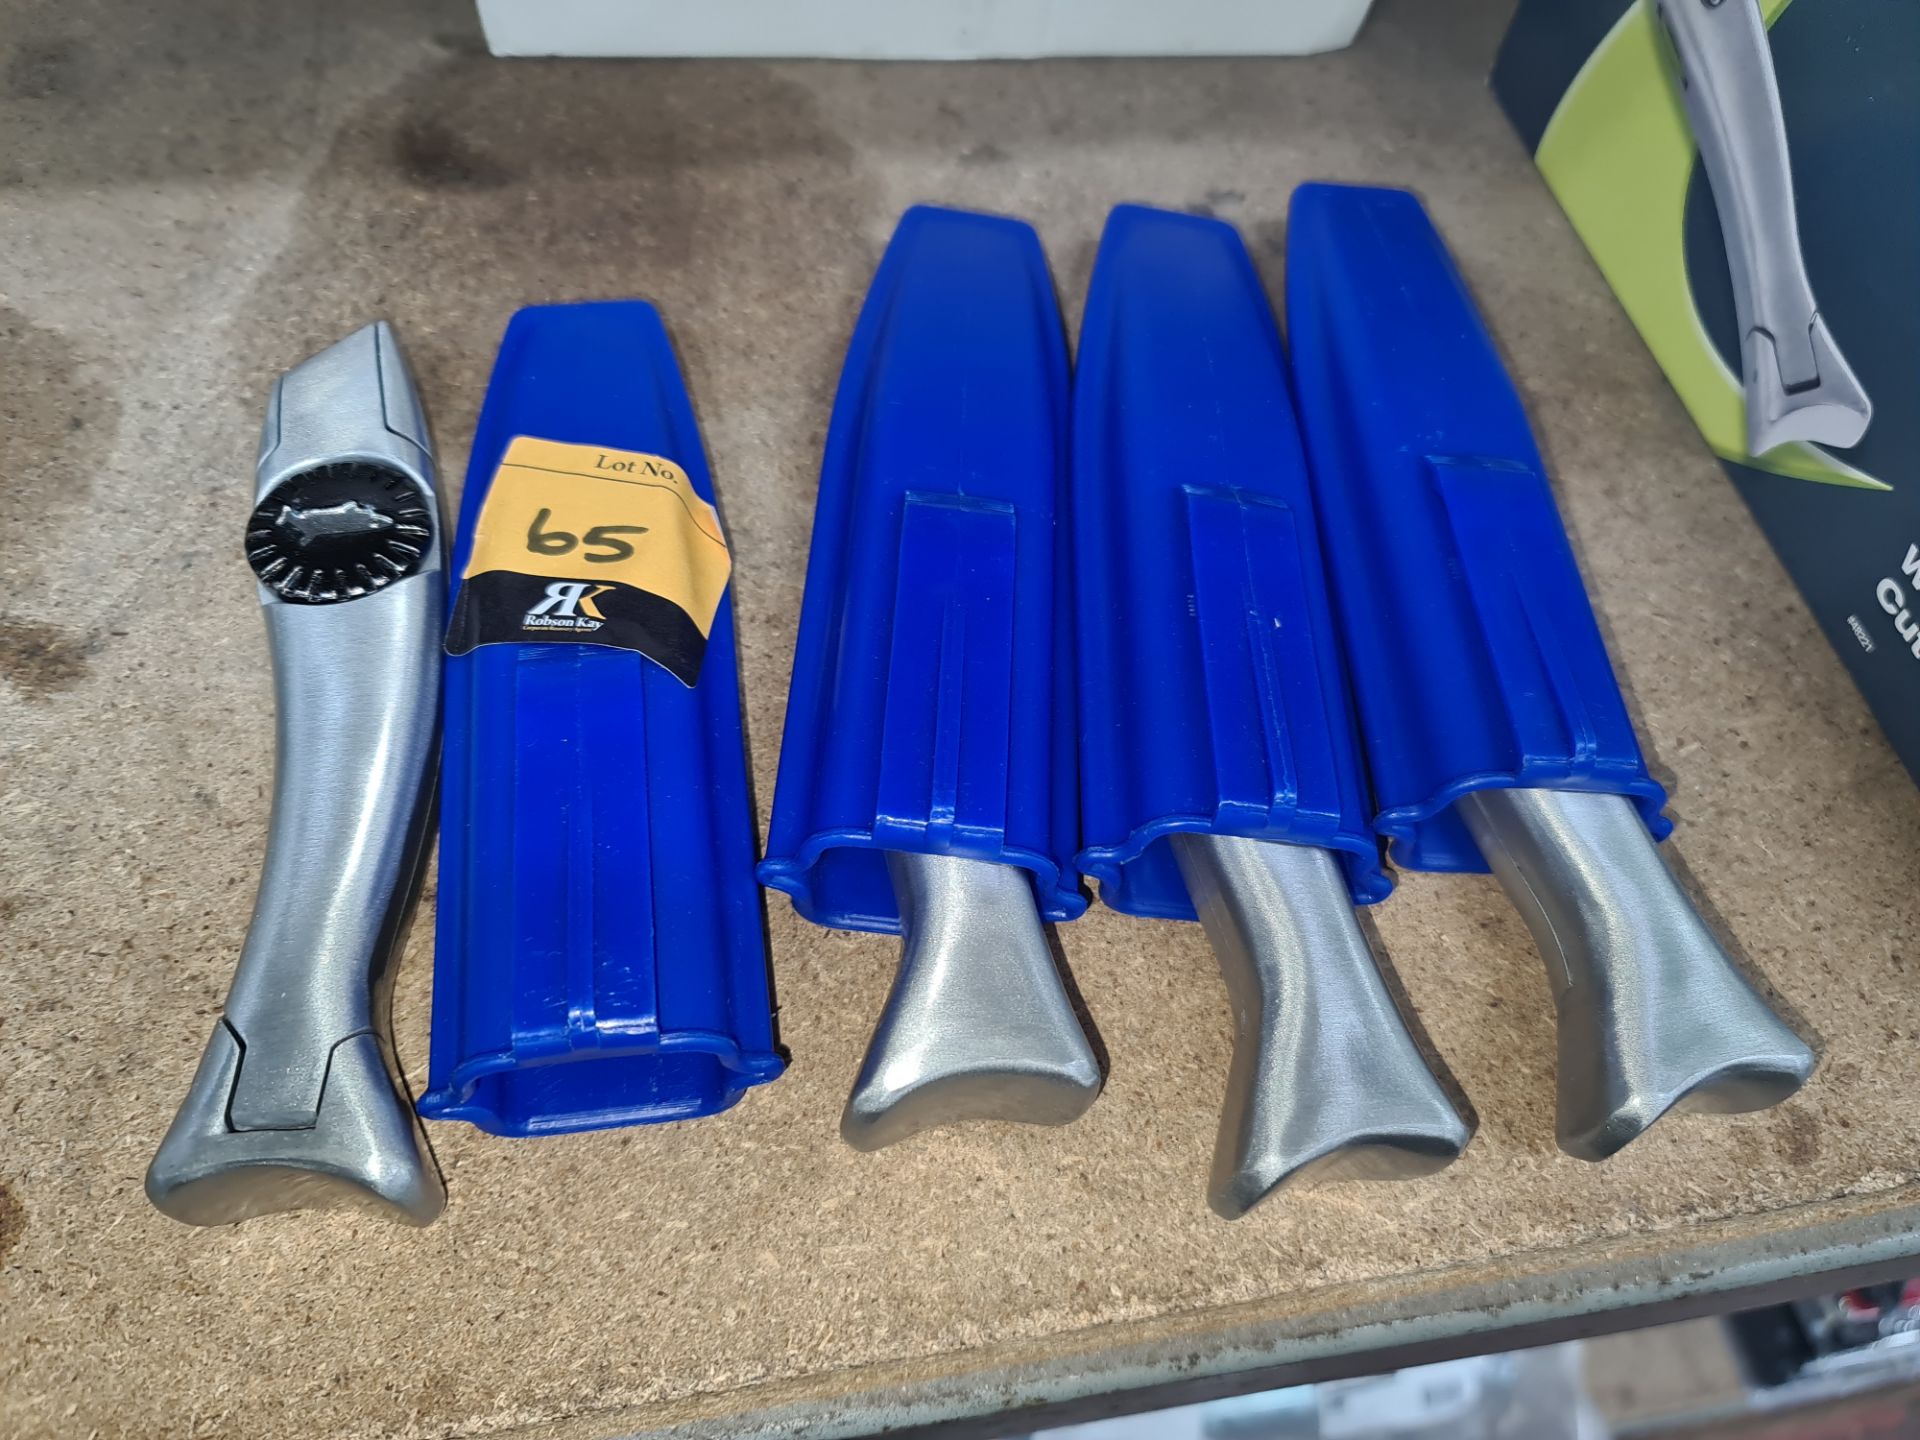 4 off silver metal knives with Dolphin symbol, each including a plastic case. NB this lot consists